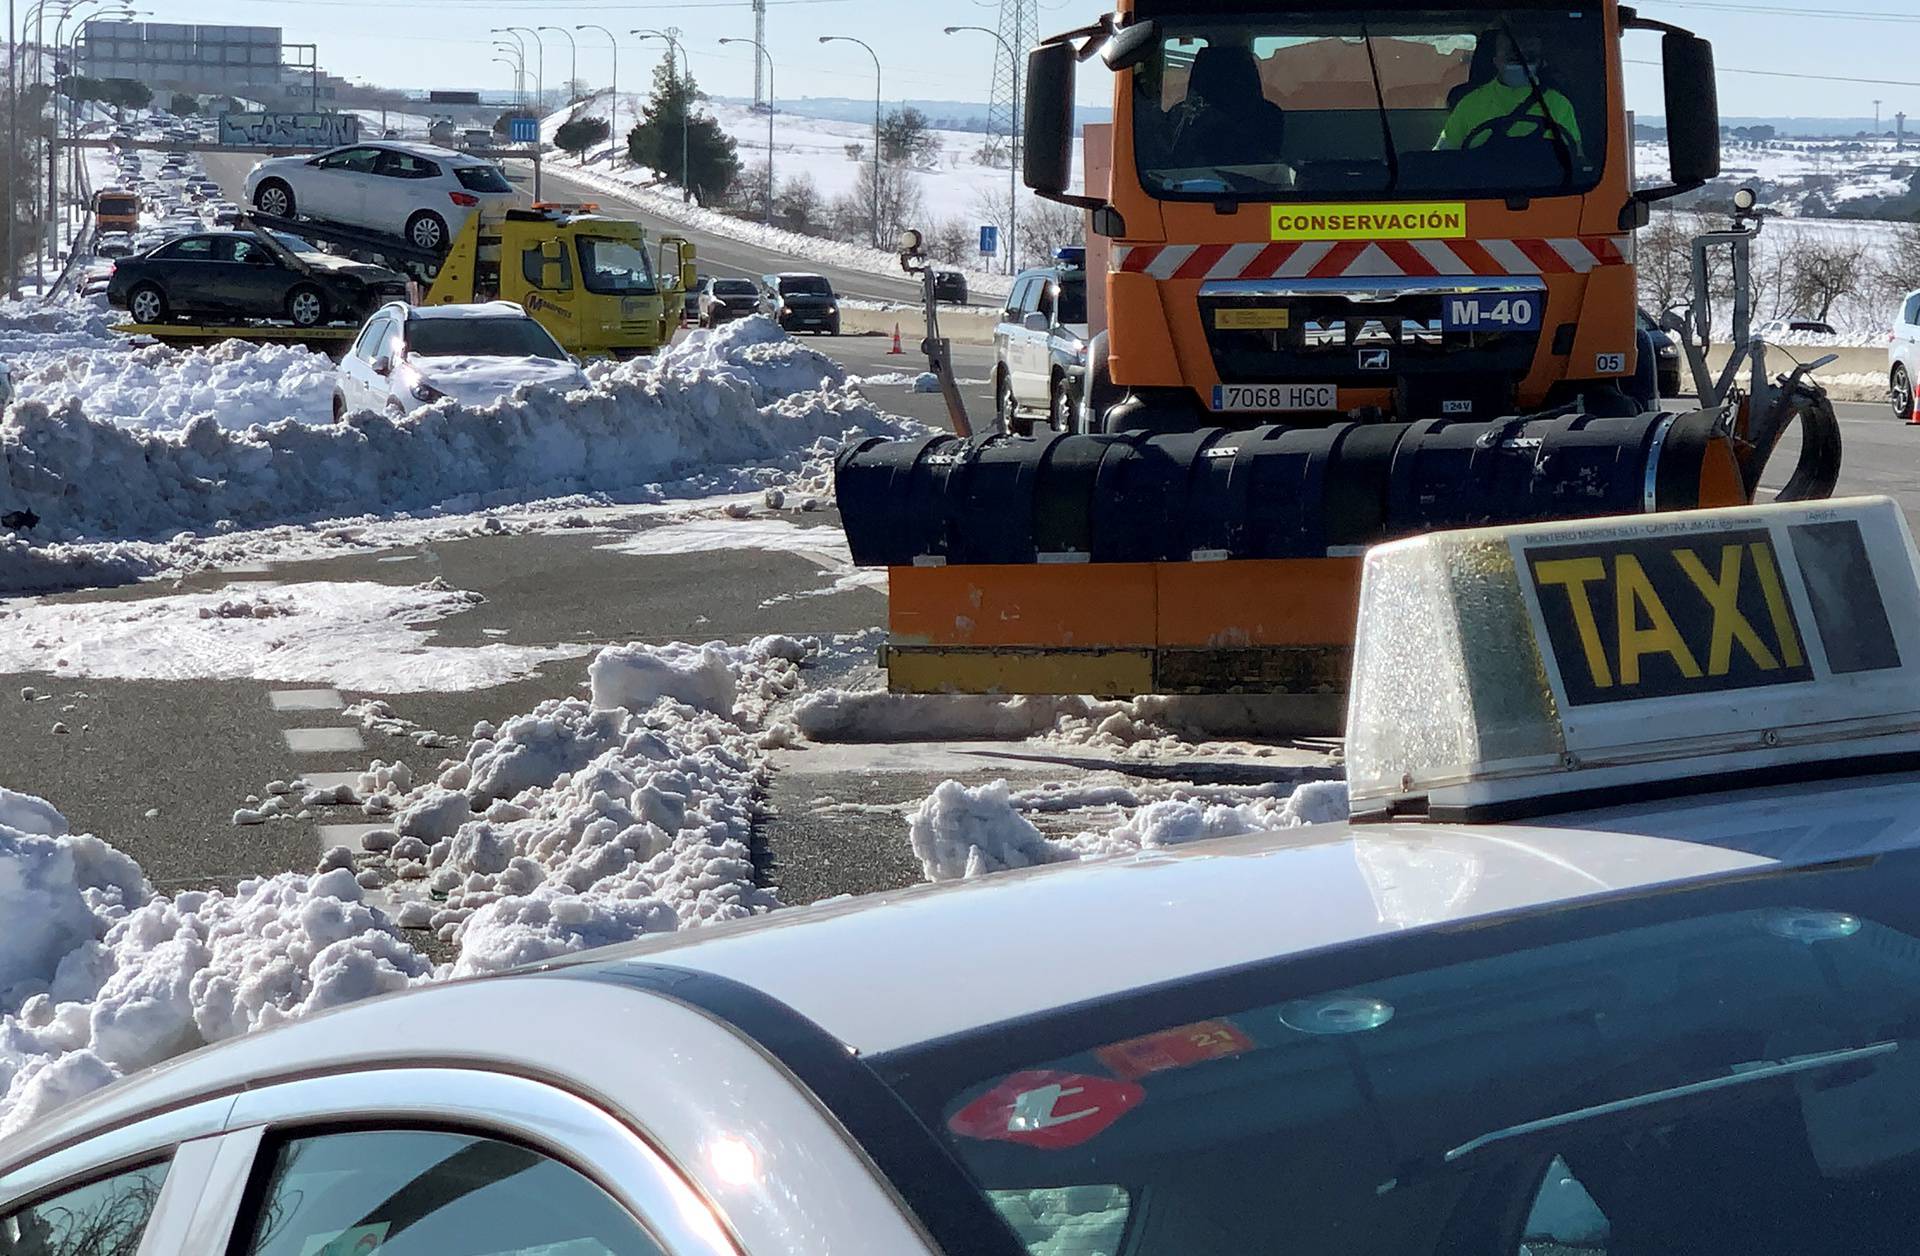 A taxi is towed on M-40 highway after heavy snowfall in Madrid